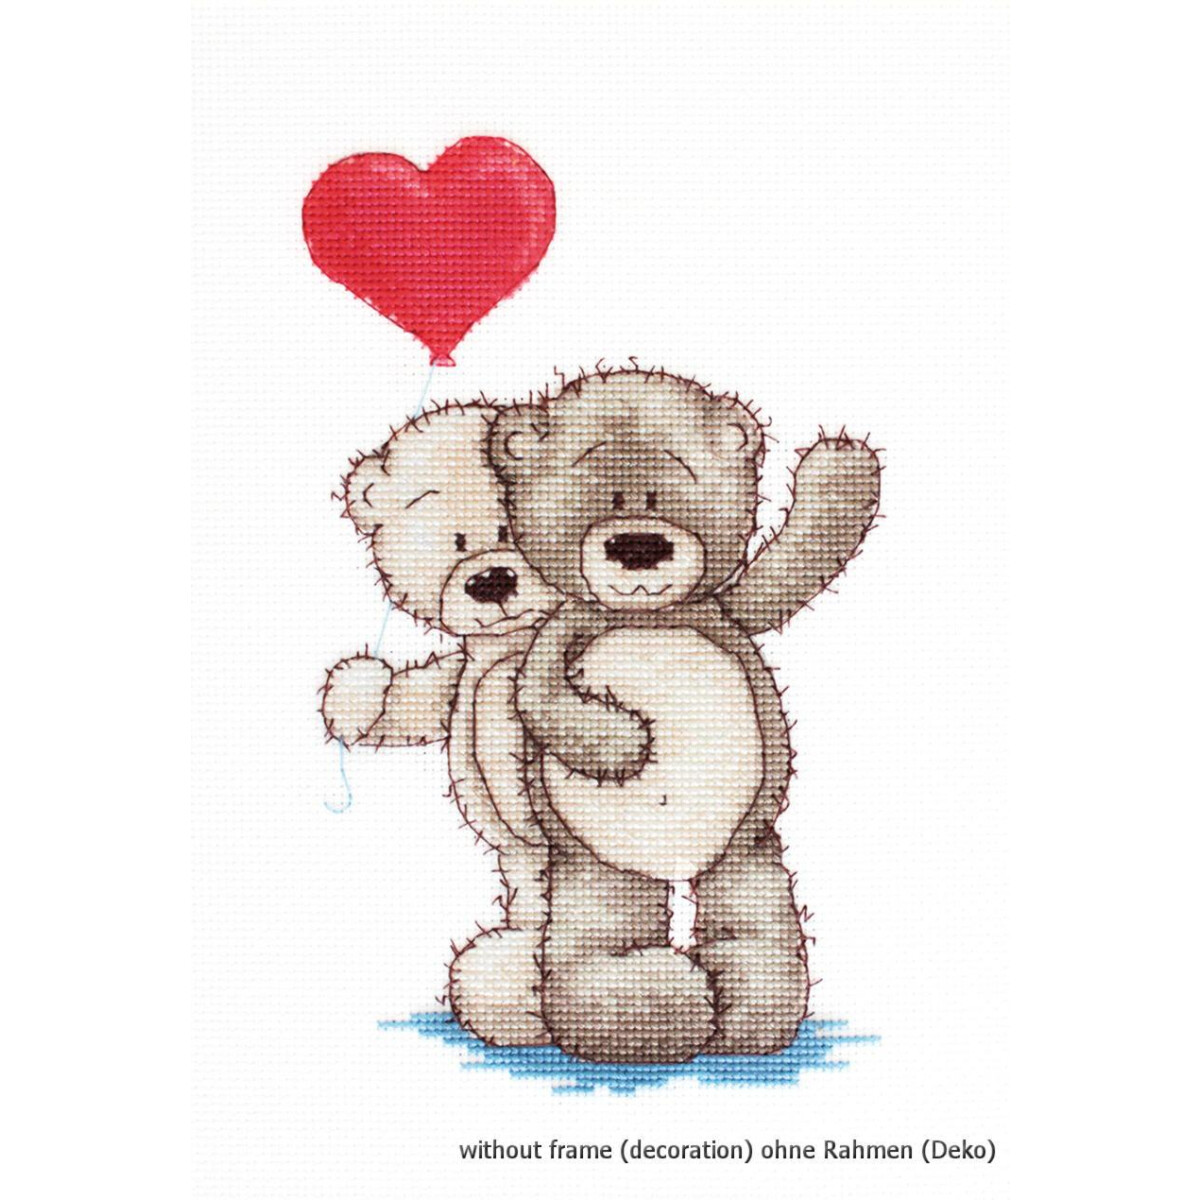 Luca-S counted Cross Stitch kit "Bruno and Bianca...